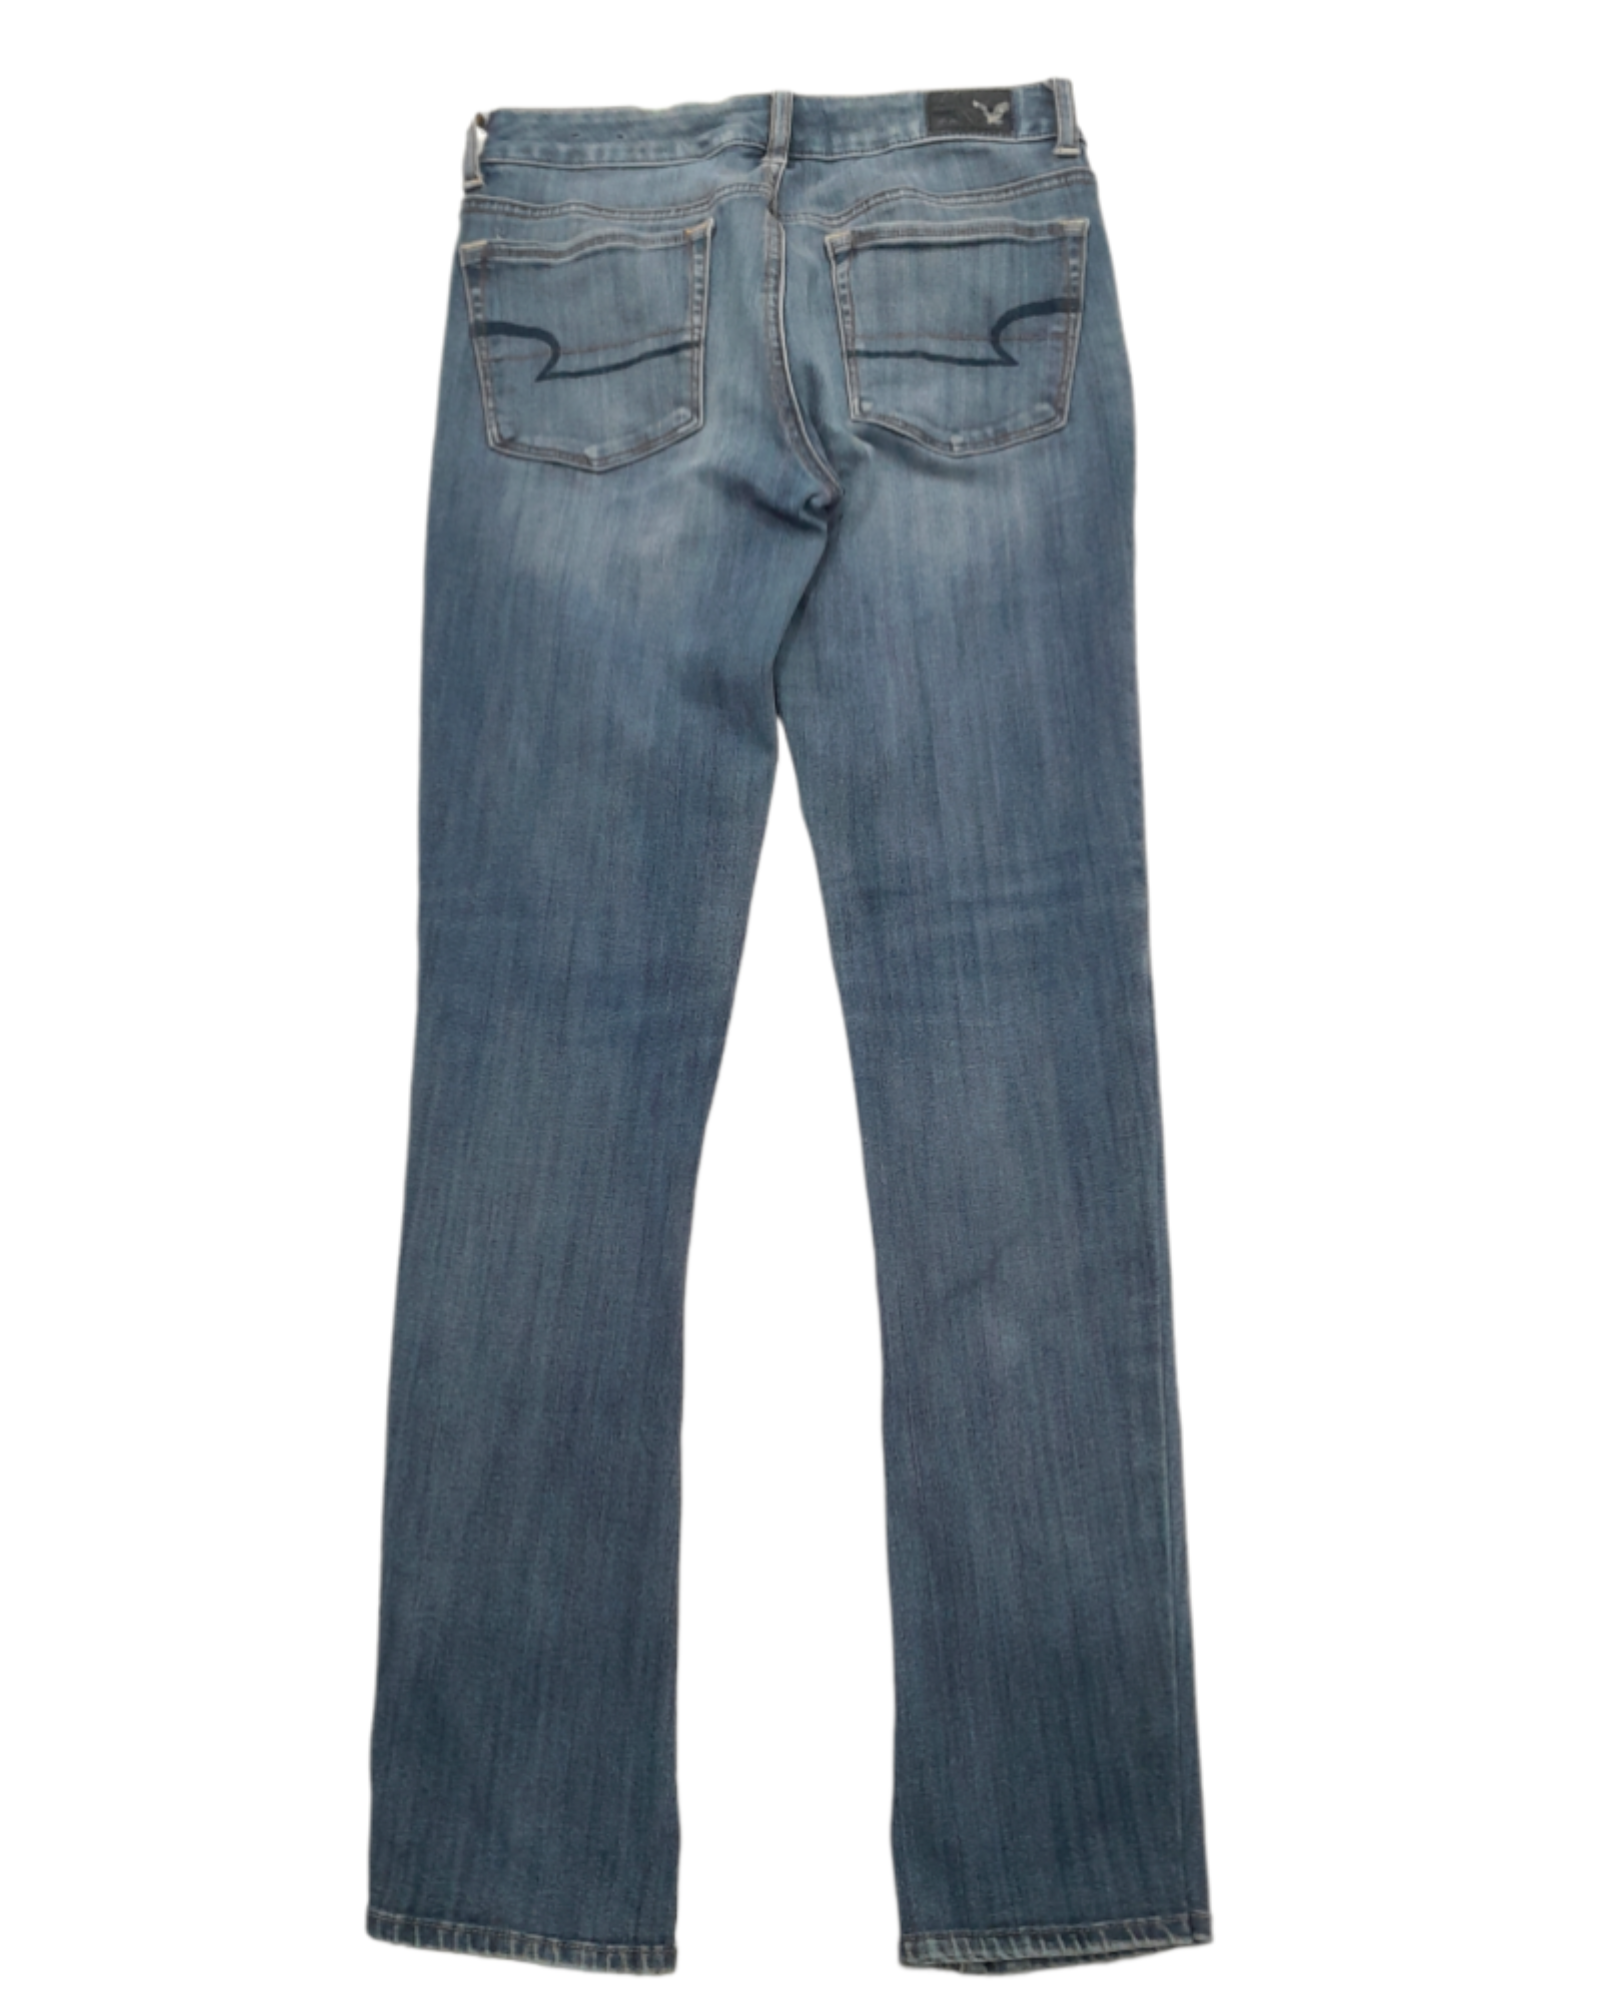 Jeans Stretch American Eagle 2